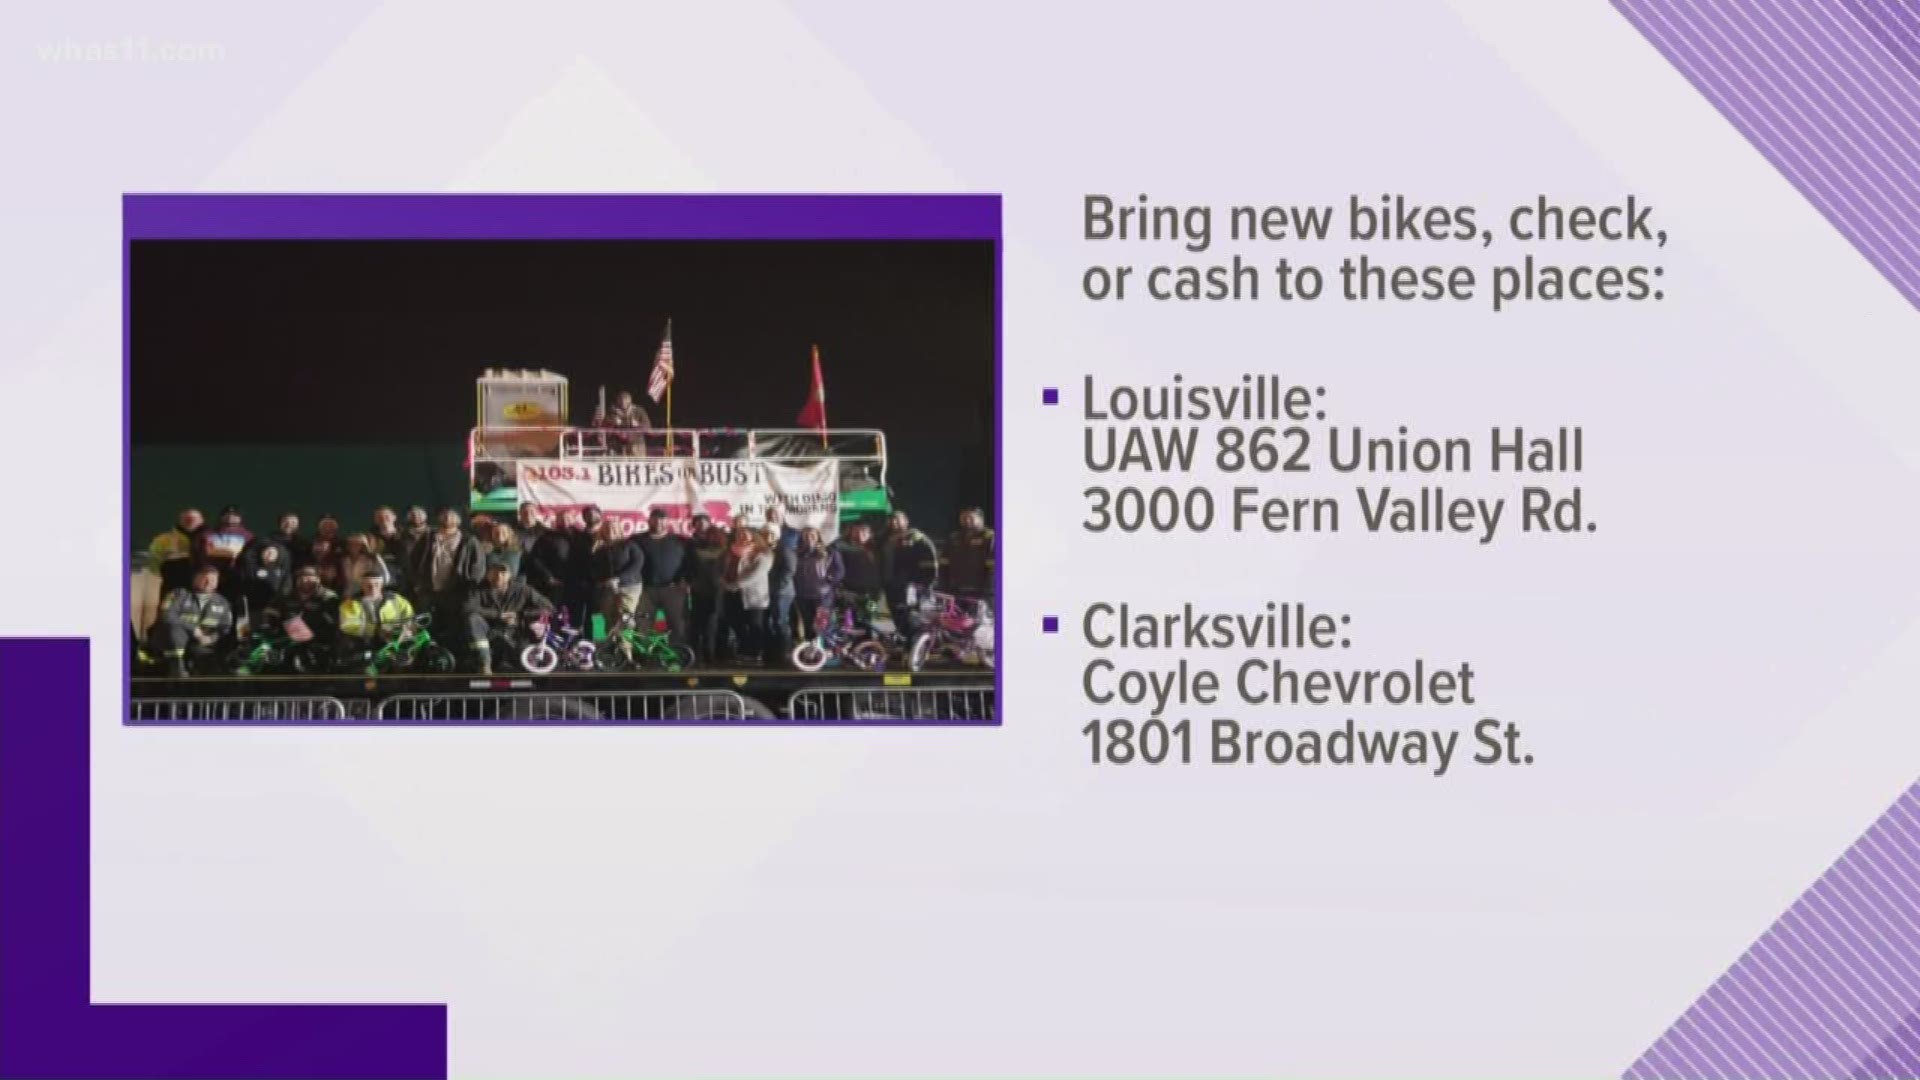 Bikes donated will go to the Marine Corps Toys for Tots and to the Salvation Army in Southern Indiana.